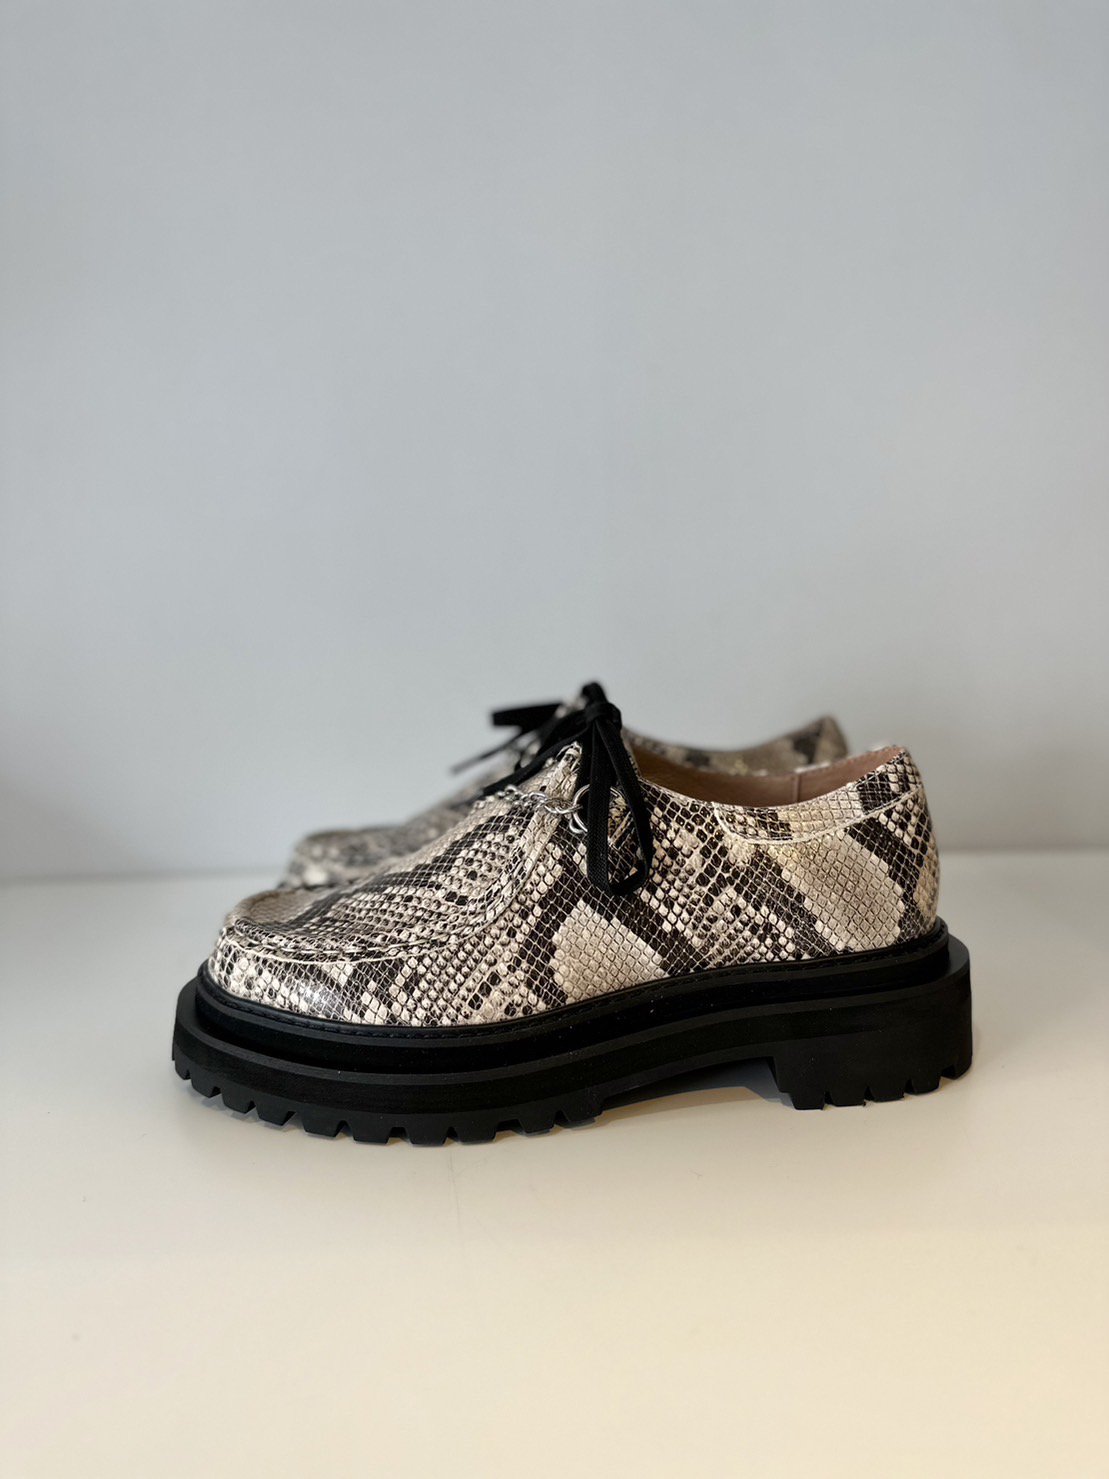 DAIRIKU<br />Python Derby Shoes / python<img class='new_mark_img2' src='https://img.shop-pro.jp/img/new/icons14.gif' style='border:none;display:inline;margin:0px;padding:0px;width:auto;' />